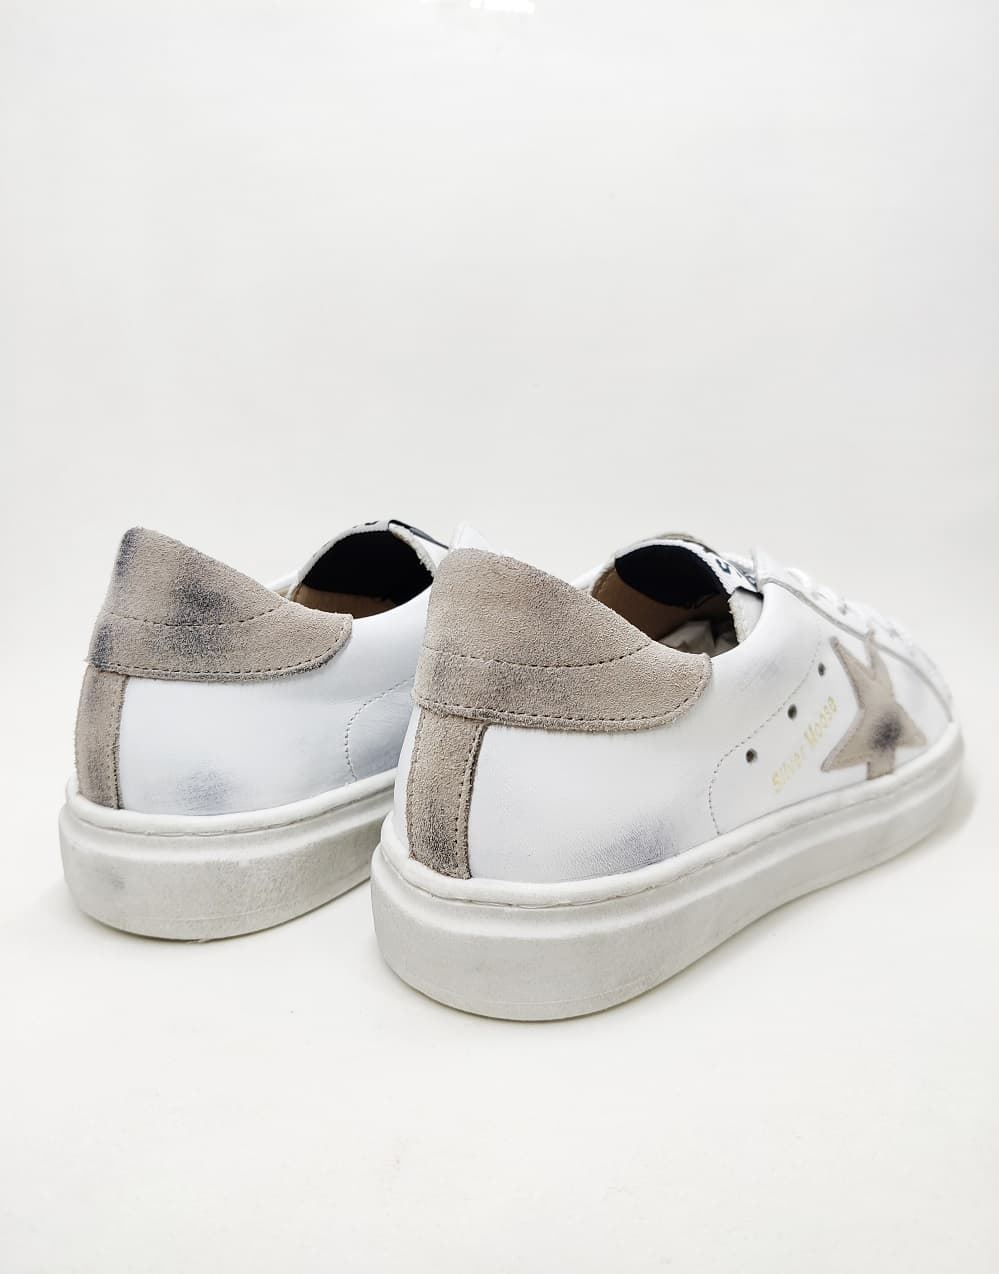 Golden Star sneakers in White Taupe leather - Image 3